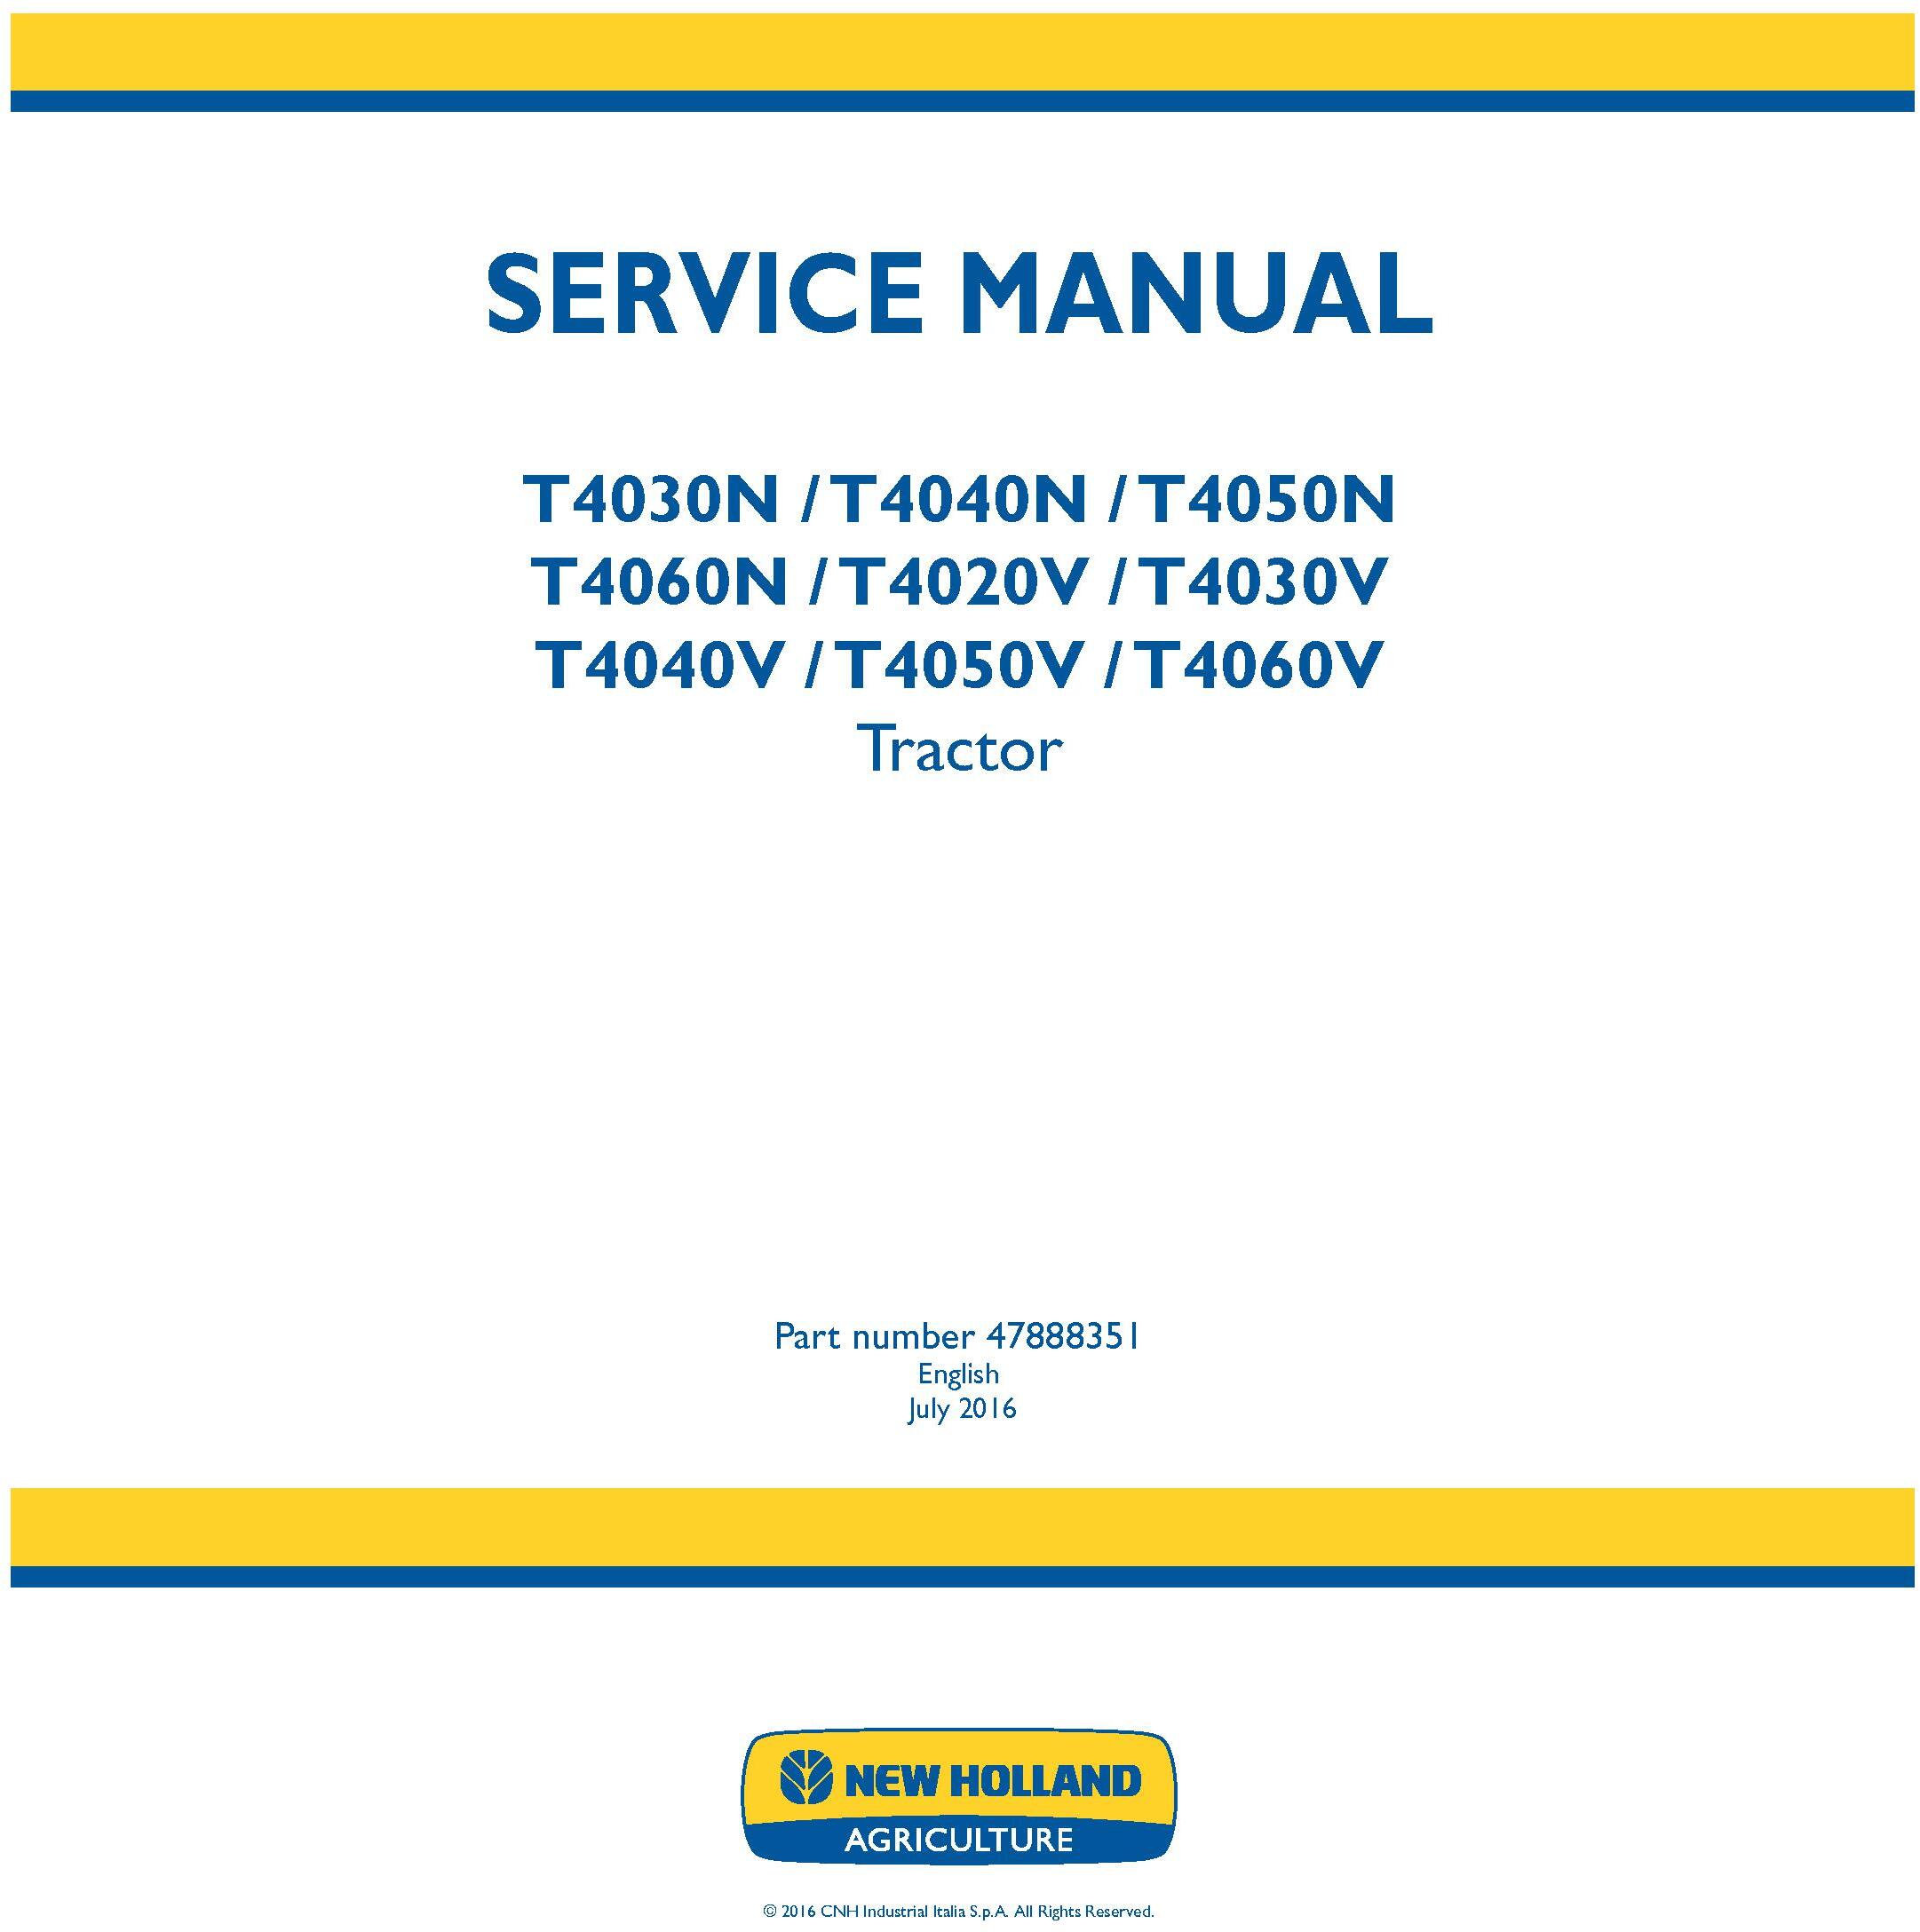 New Holland T4030N T4040N T4050N T4060N; T4020V T4030V T4040V T4050V T4060V Tractor Service Manual - 19435